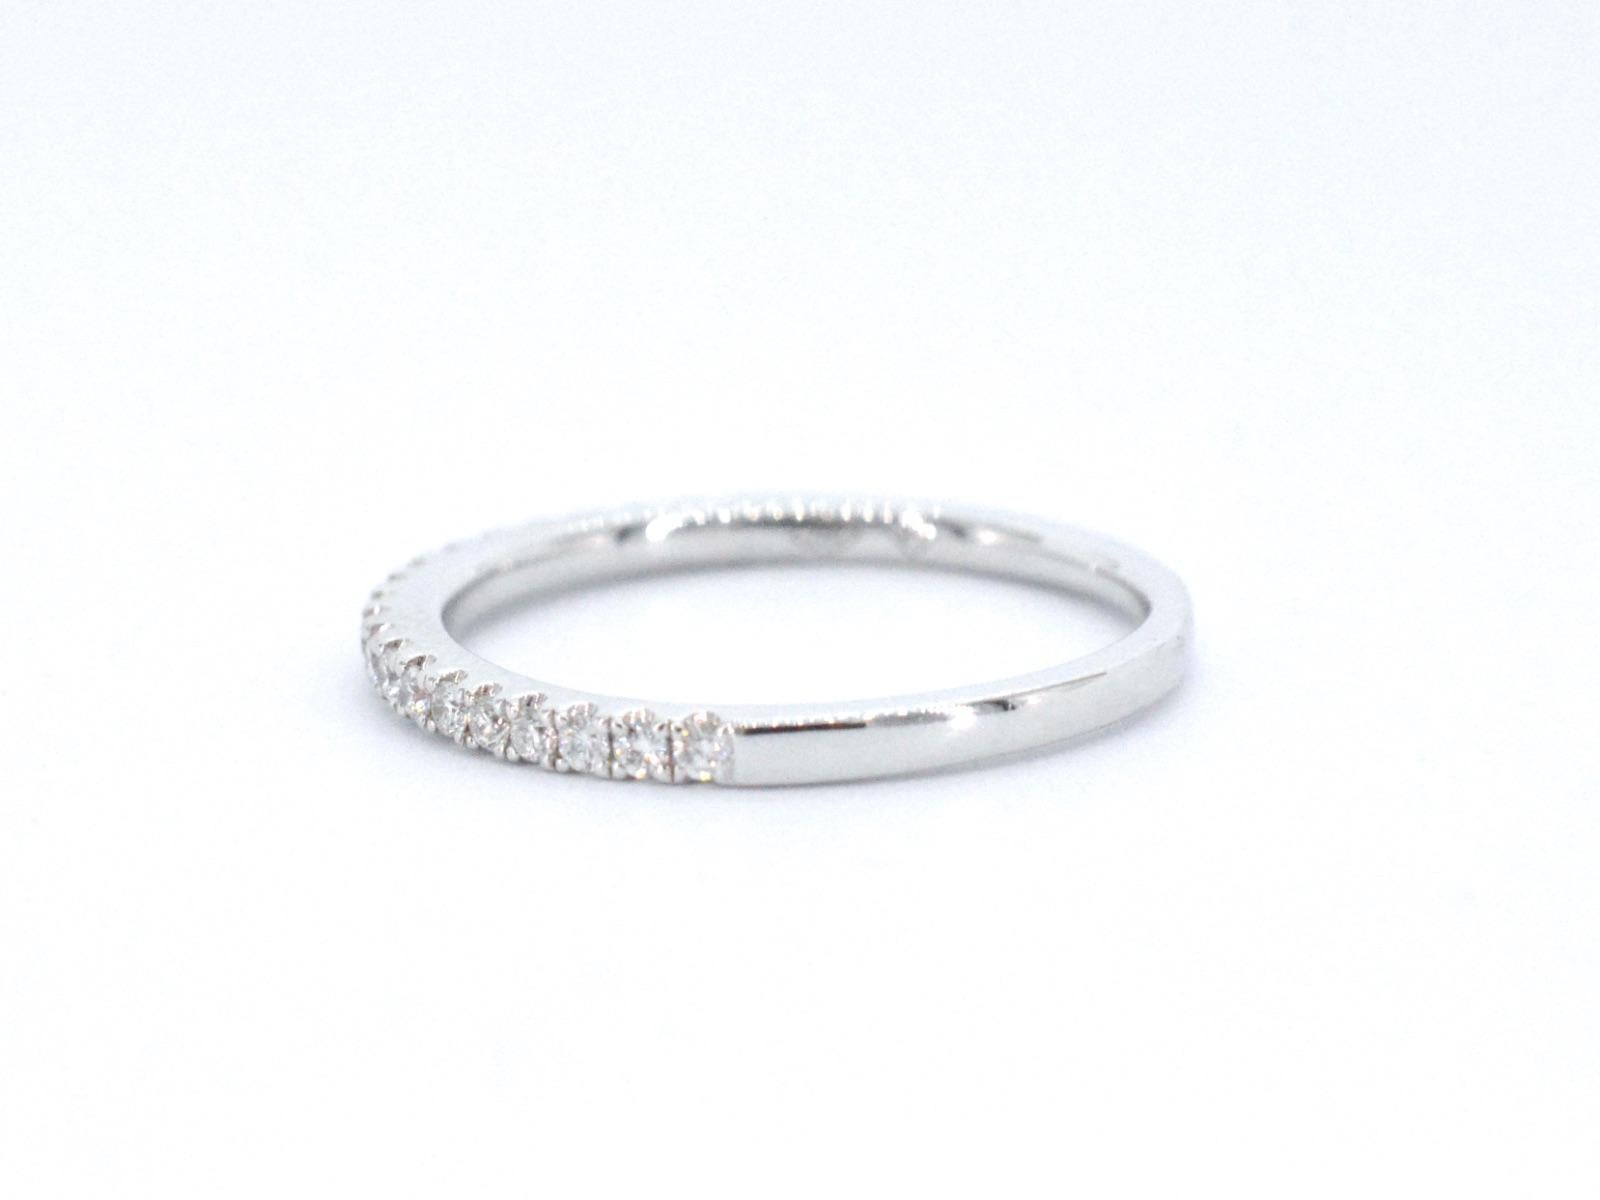 Women's White Gold Ring with Brilliant Cut Diamond For Sale